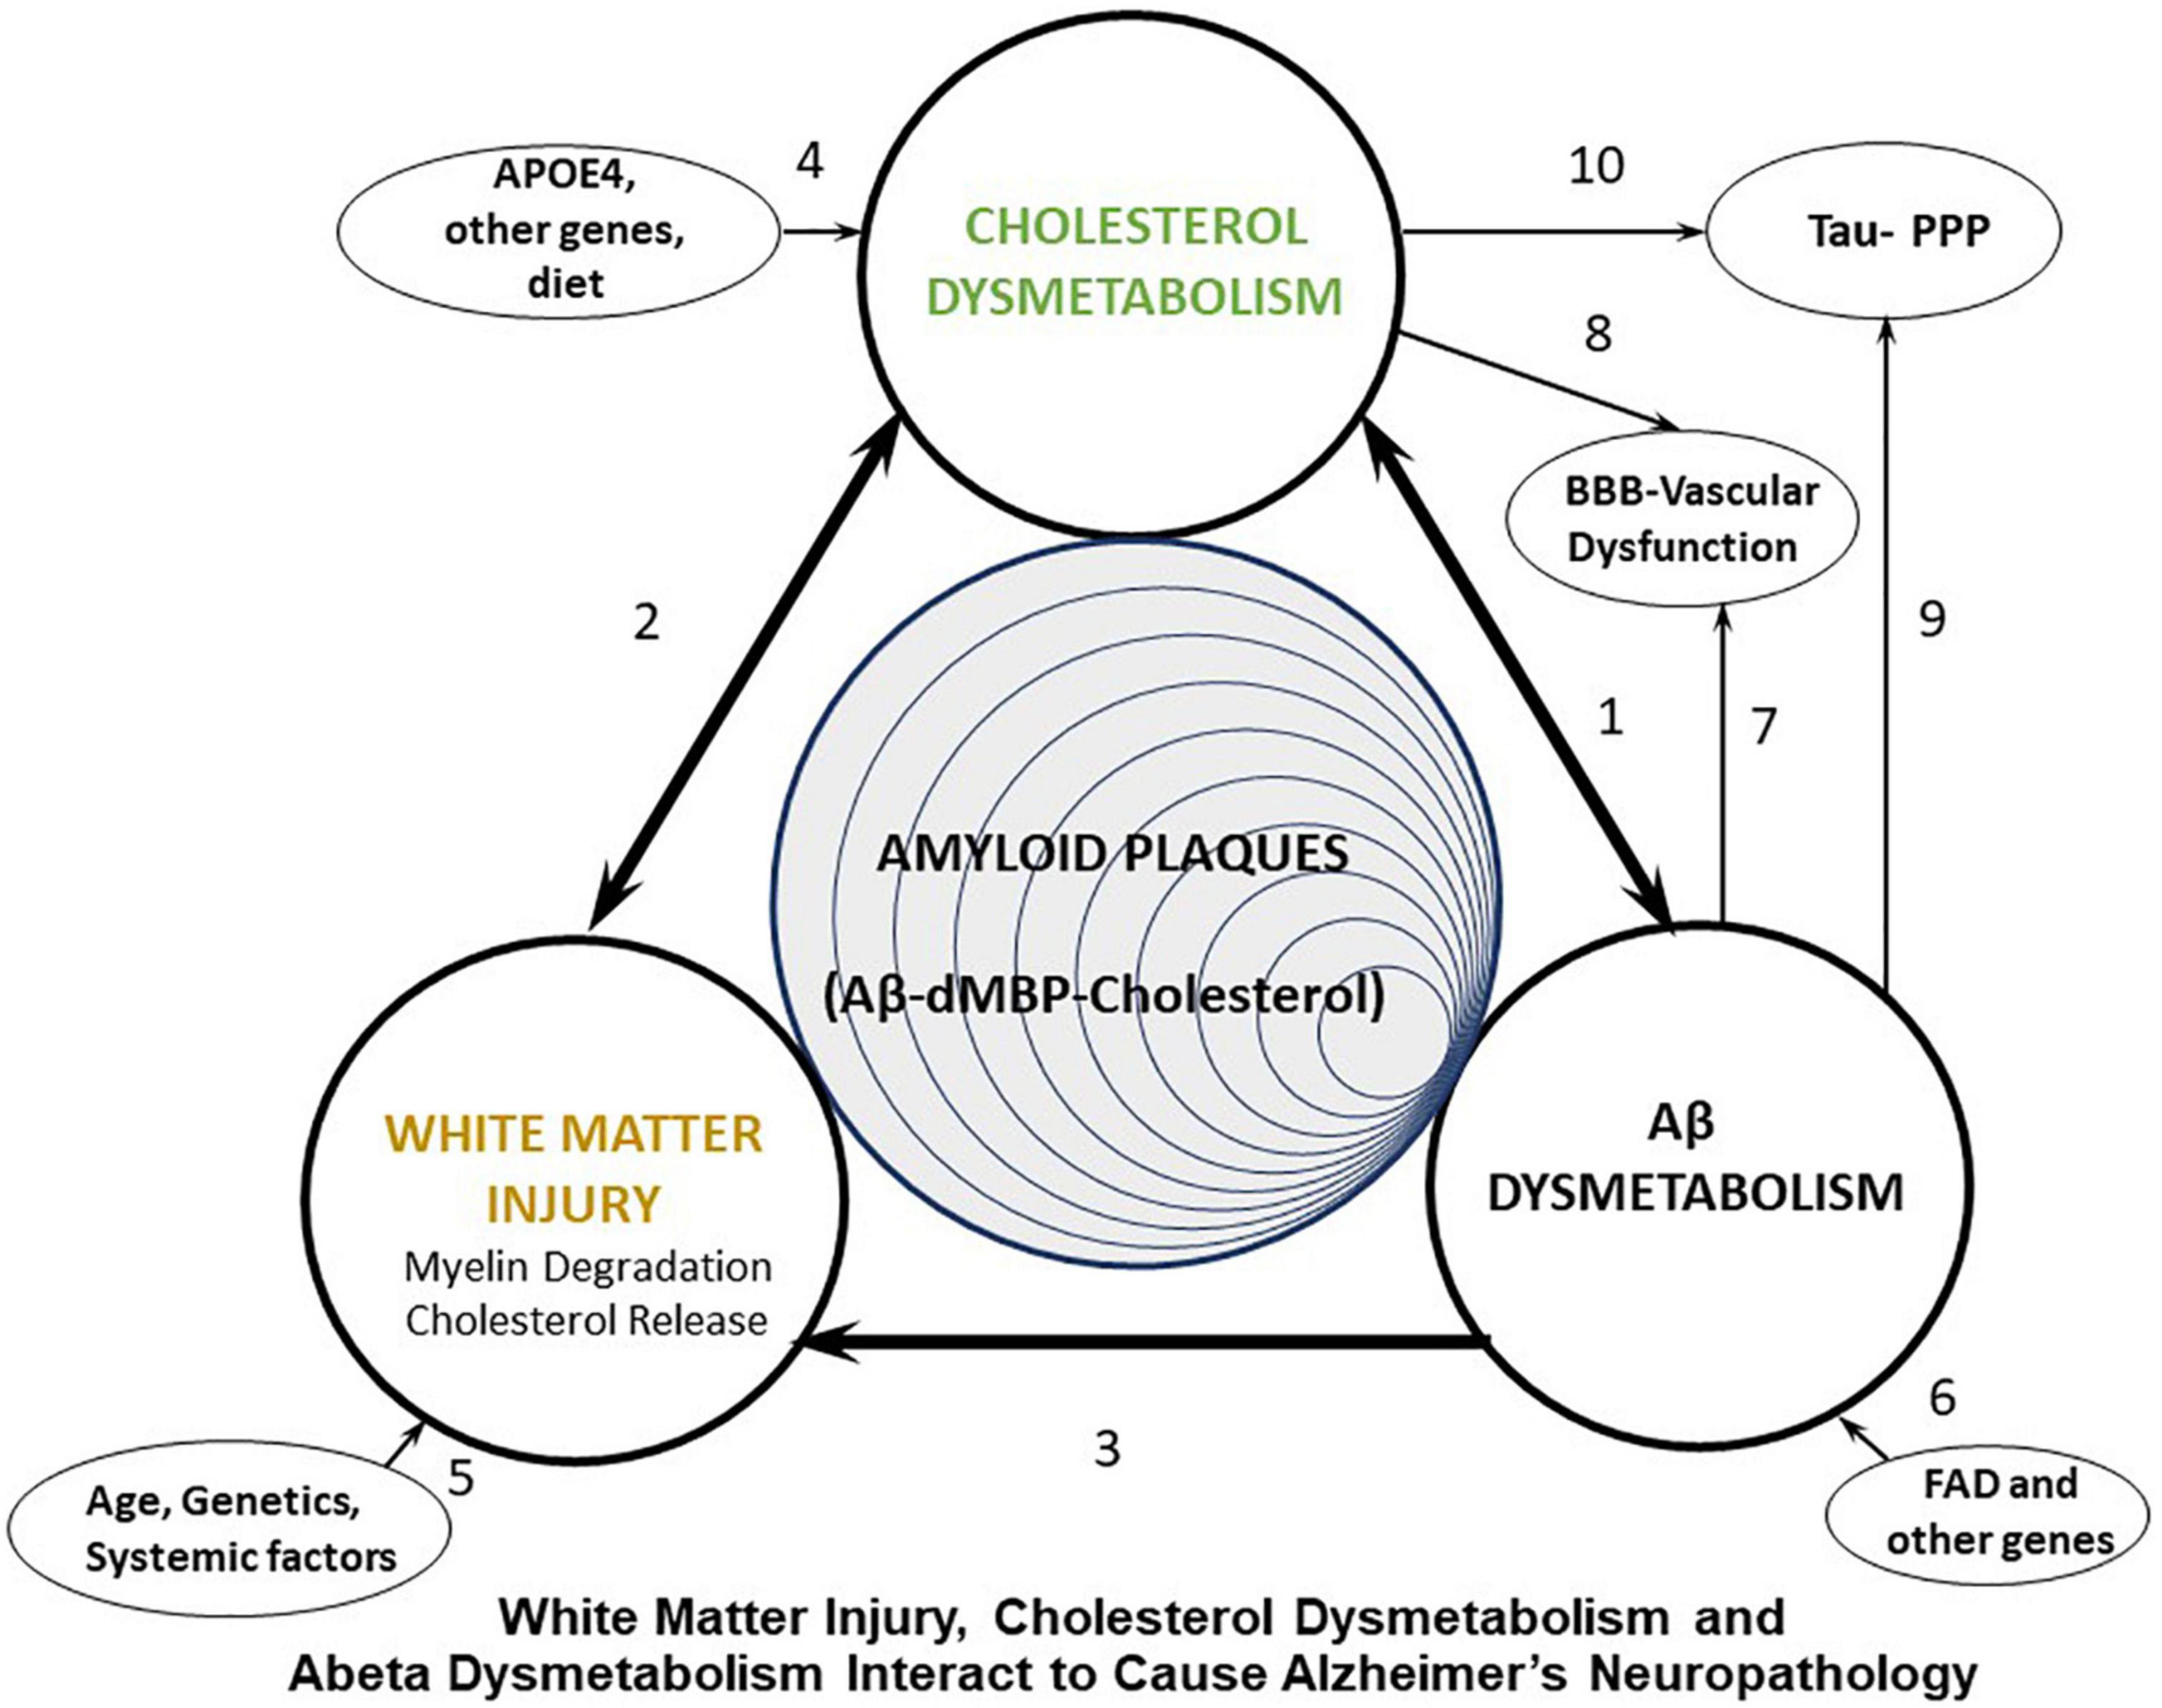 White matter injury, cholesterol dysmetabolism, and APP/Abeta dysmetabolism interact to produce Alzheimer’s disease (AD) neuropathology: A hypothesis and review